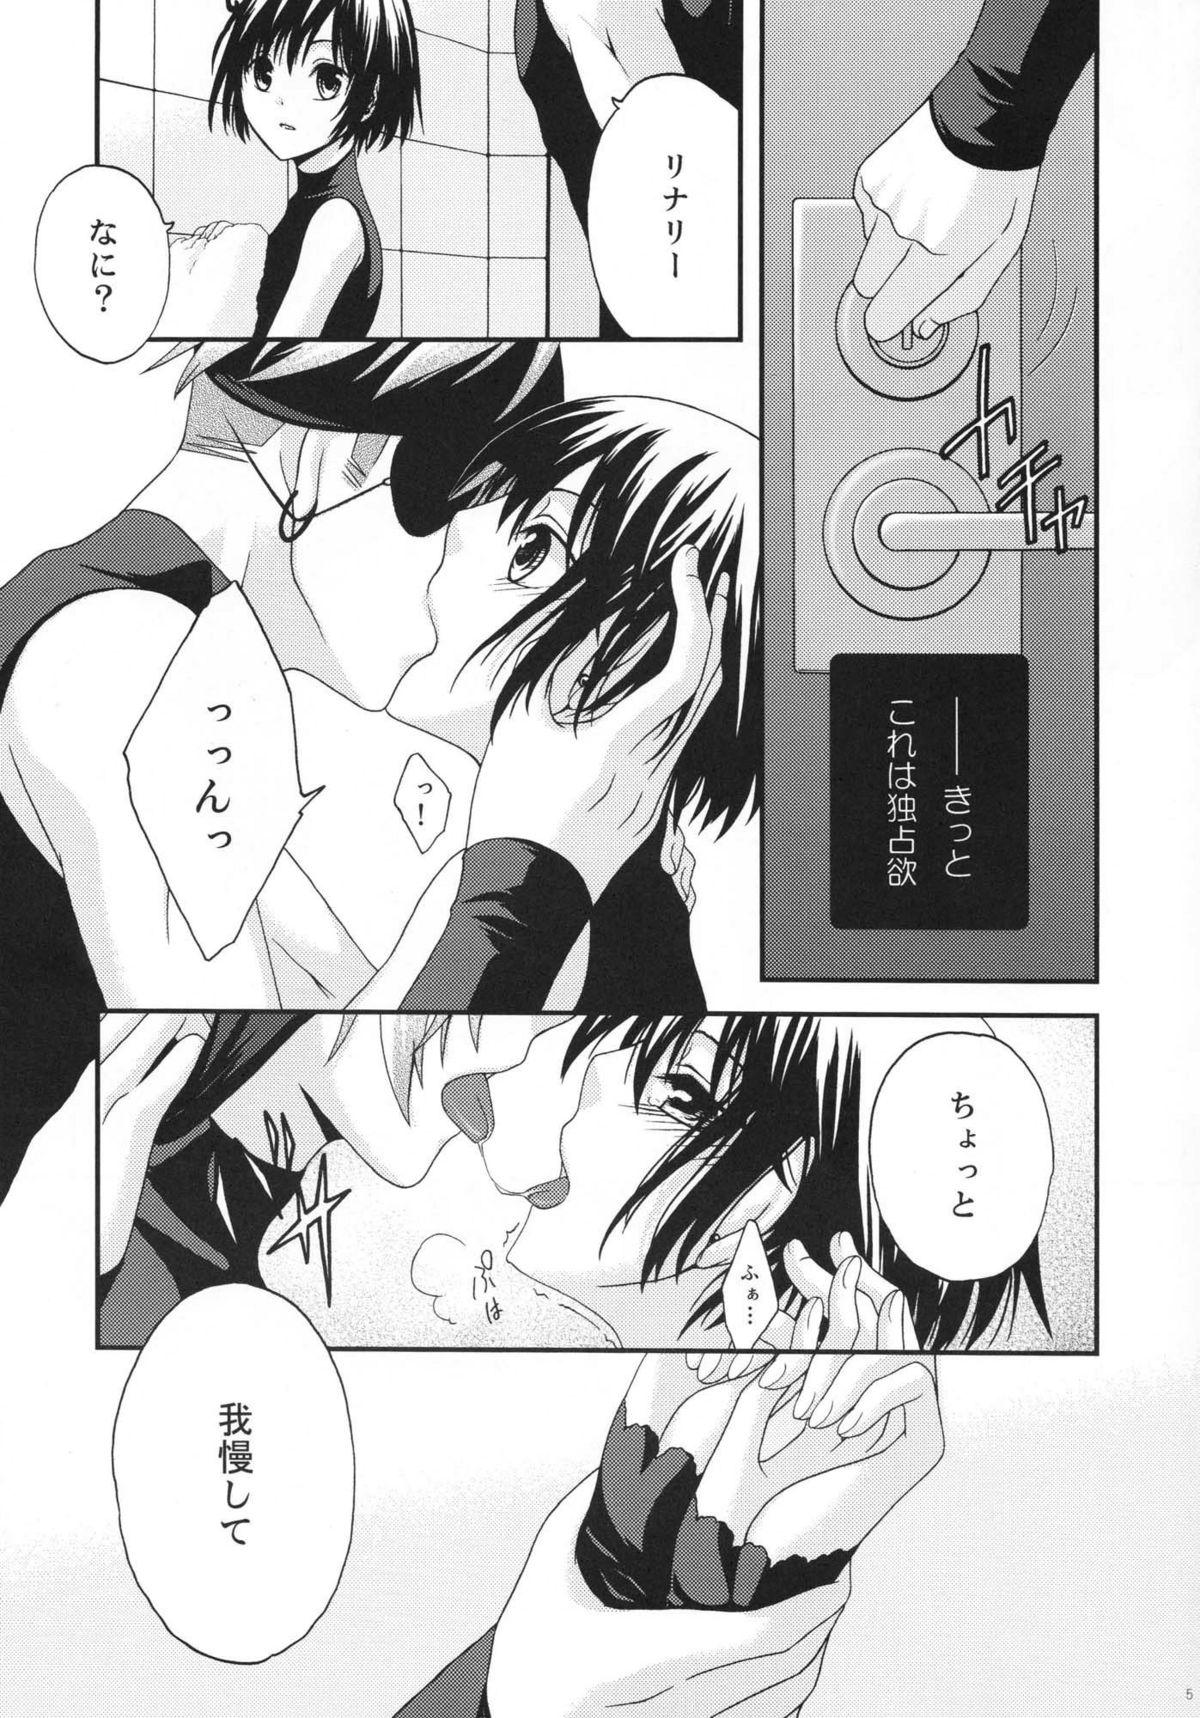 Mouth Active Heart - D.gray-man Private - Page 4